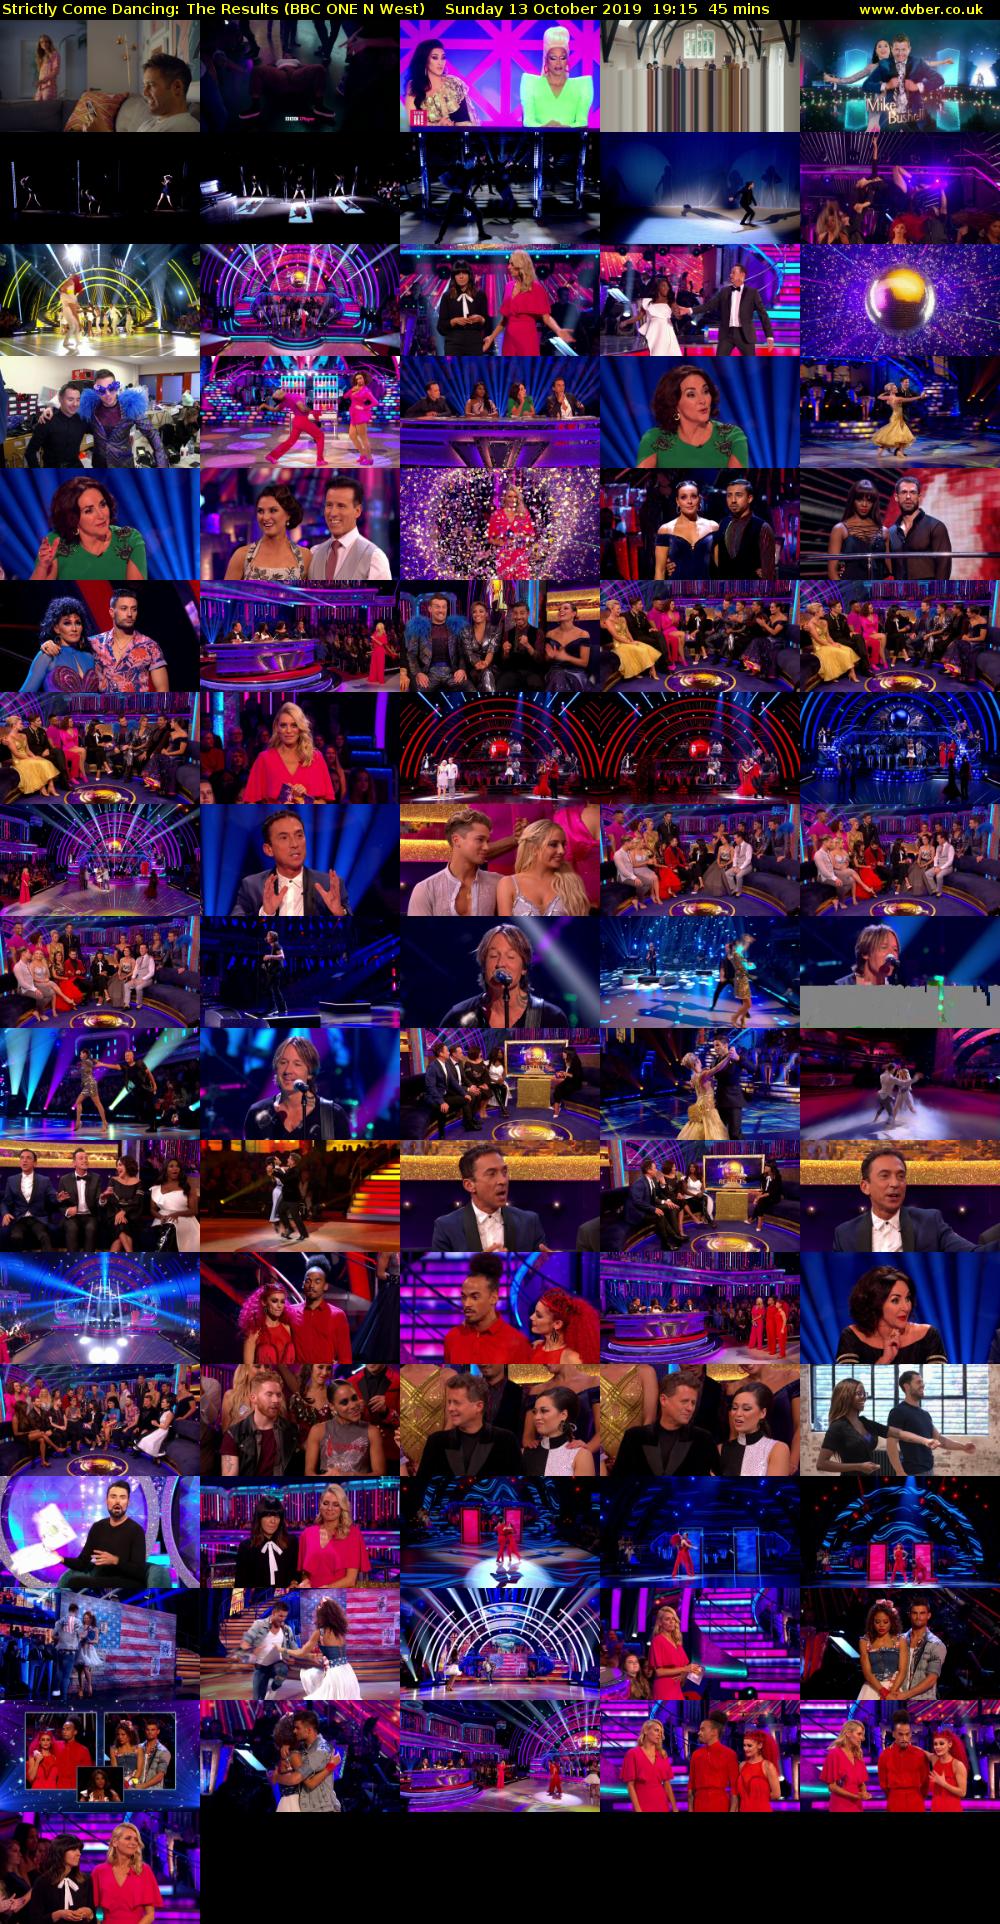 Strictly Come Dancing: The Results (BBC ONE N West) Sunday 13 October 2019 19:15 - 20:00